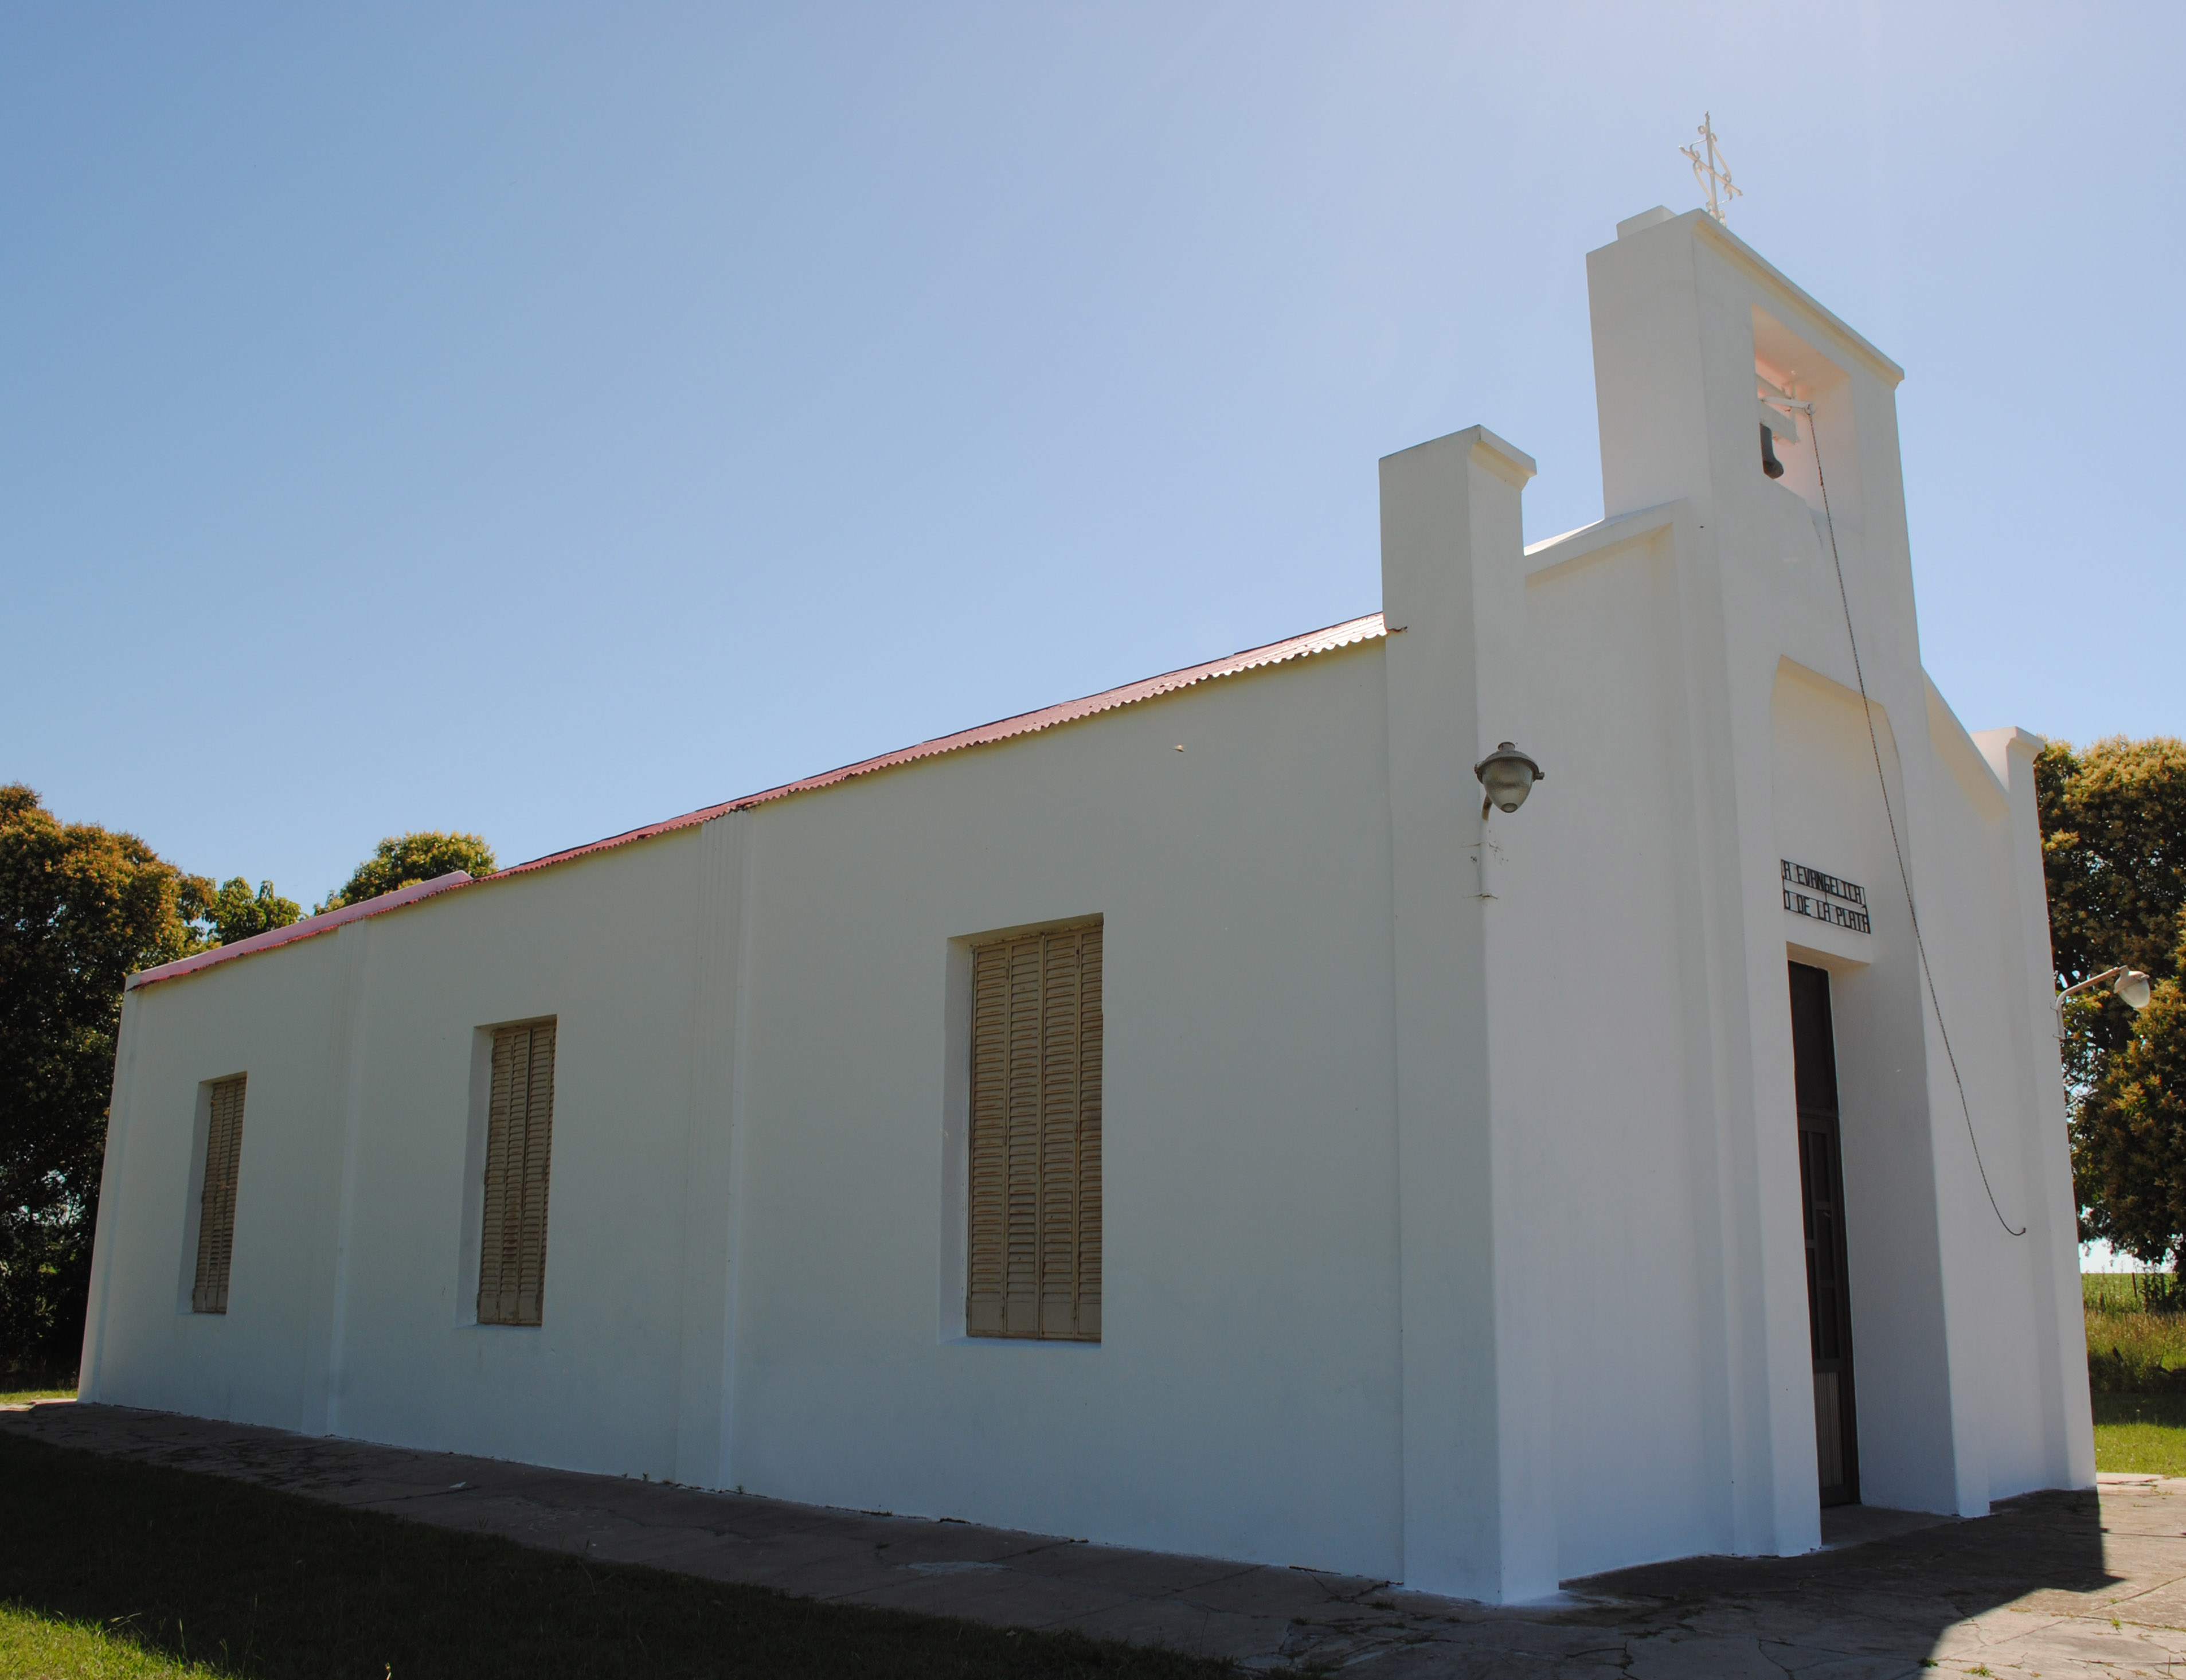 Recent photograph of the church in Irazusta built in 1926. Source: Leandro Hildt.